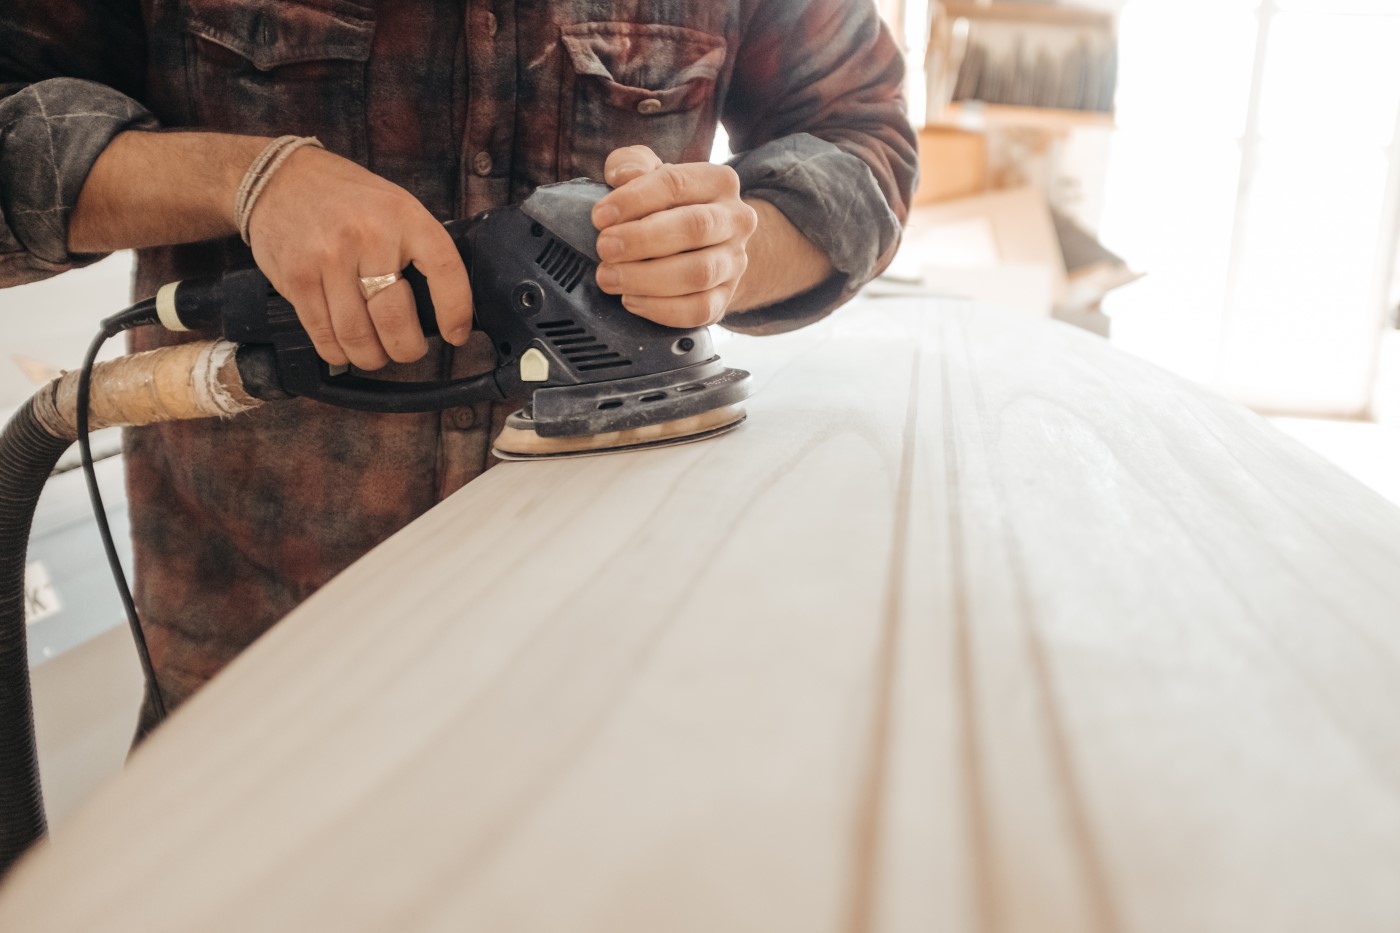 Man in plaid shirt using electric sander power tool on a board of wood.